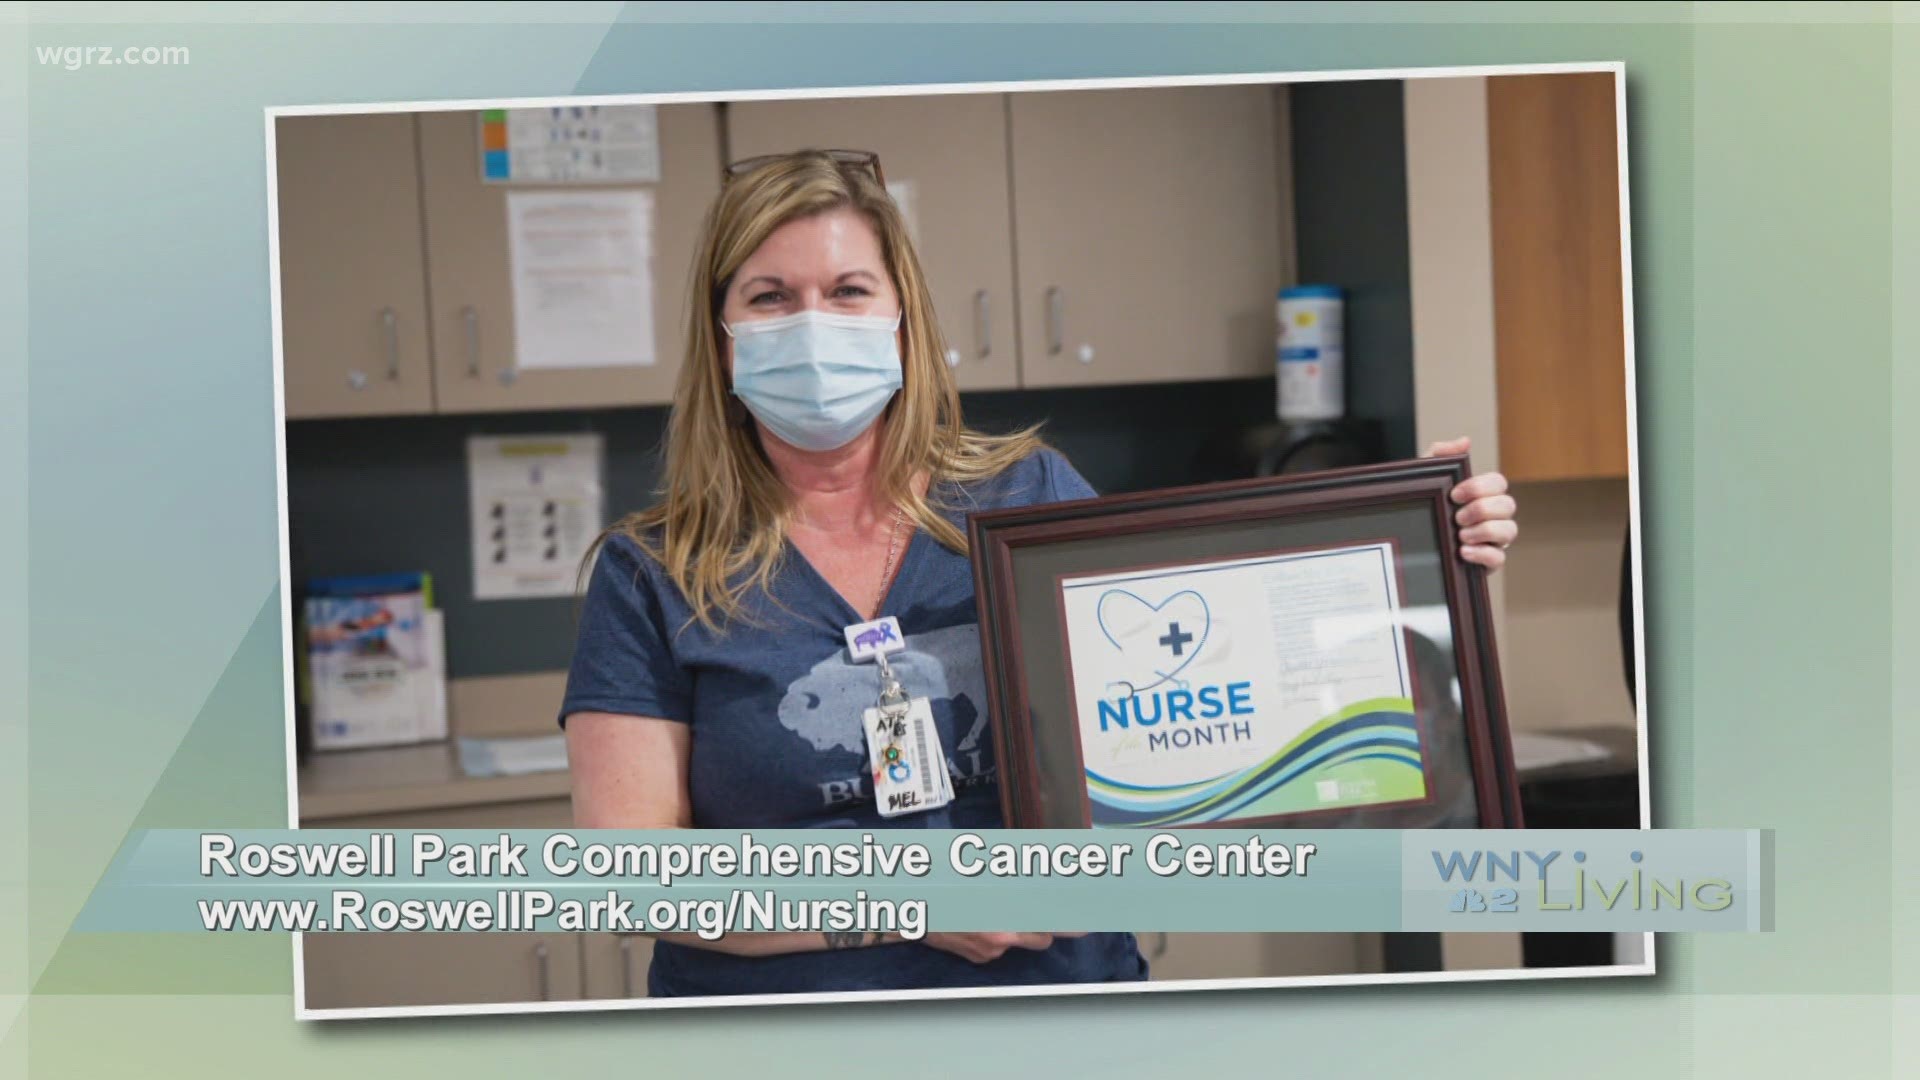 WNY Living - June 5 - Roswell Park Comprehensive Cancer Center (THIS VIDEO IS SPONSORED BY ROSWELL PARK COMPREHENSIVE CANCER CENTER)